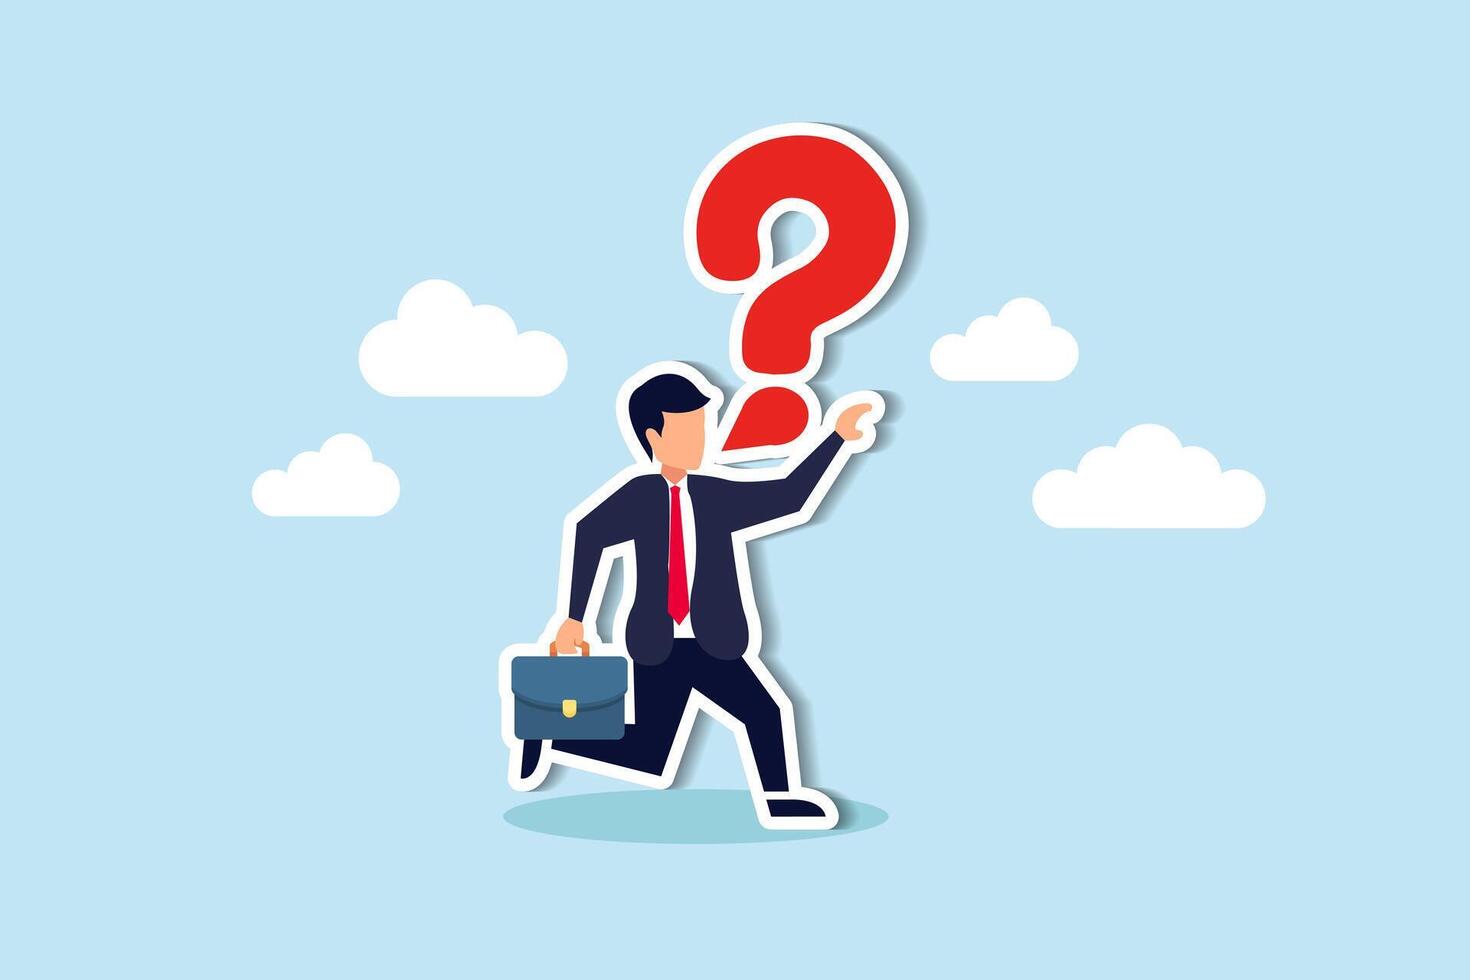 Ask business queries to seek answers, vocalize to garner support in resolving work issues concept, brave confident businessman speak out loud with speech bubble question mark symbol. vector